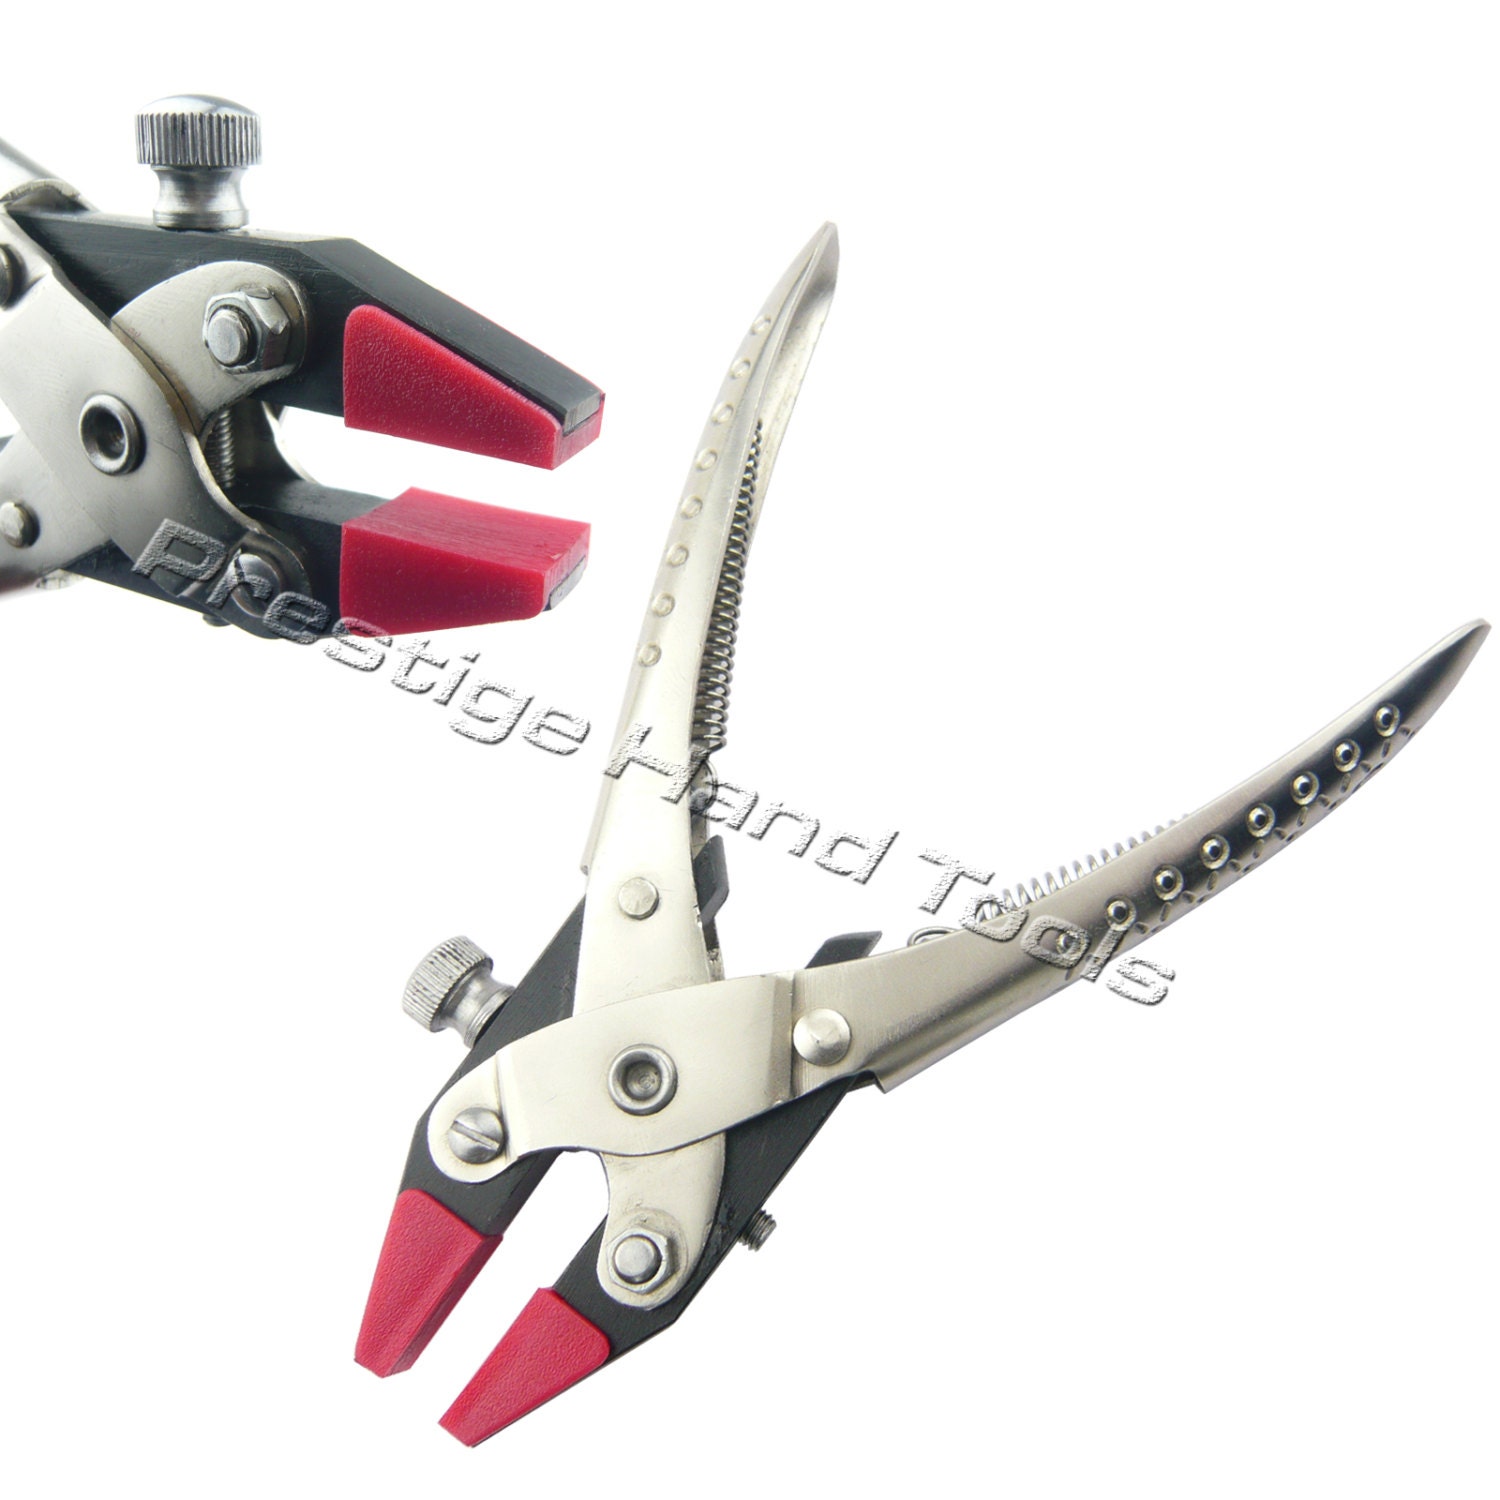 Three Piece Nylon Jaw Plier Set In Carrying Case By Beadsmith